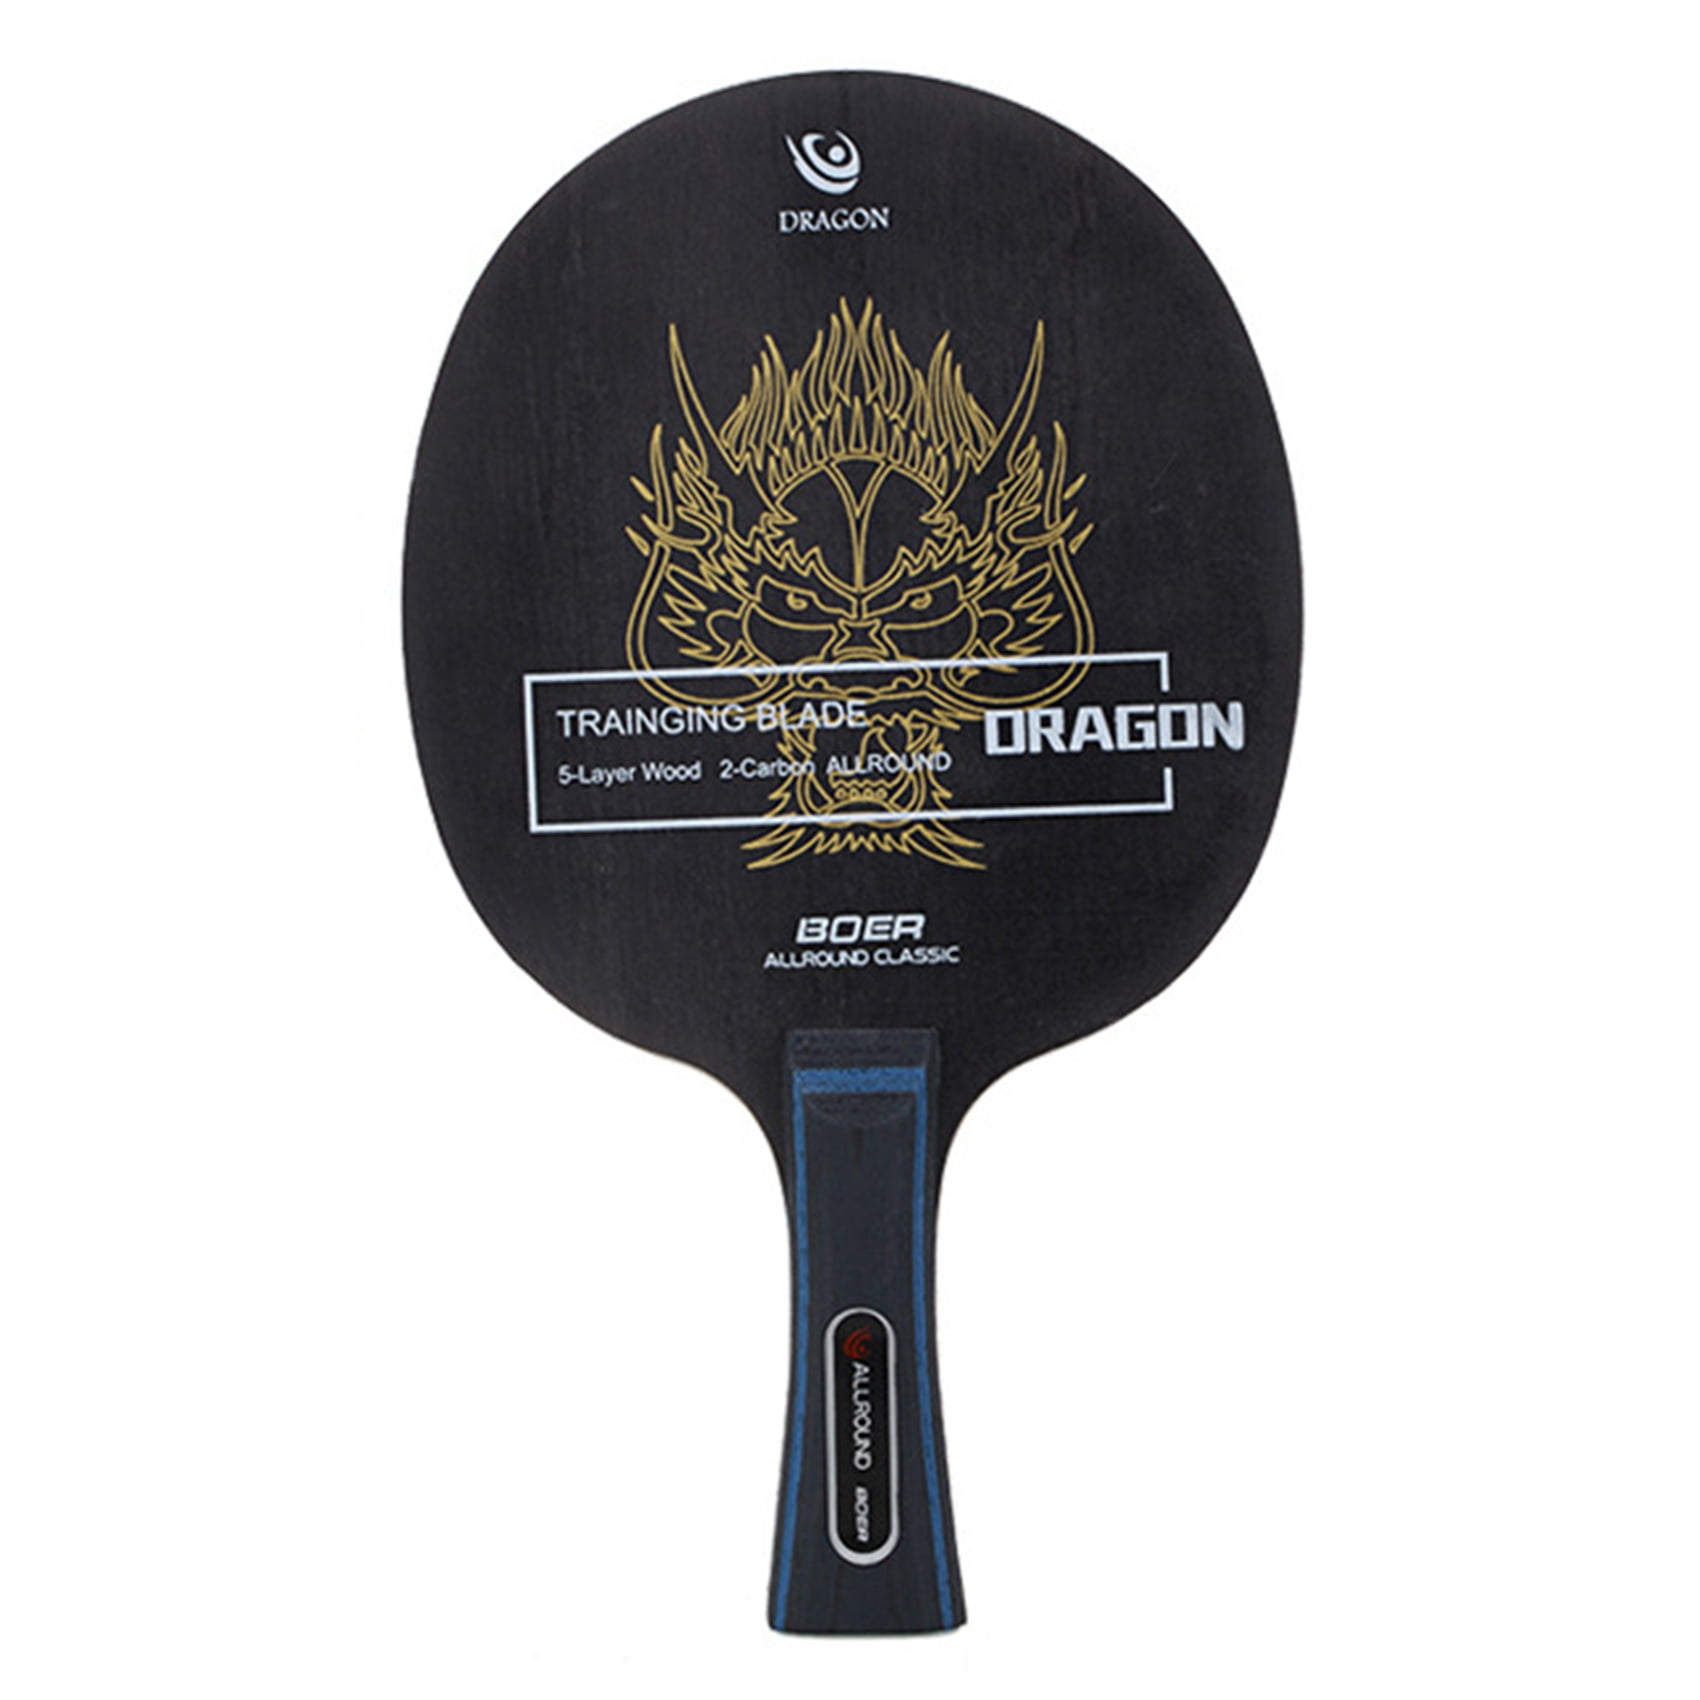 Professional Table Tennis Racket Ping-Pong Carbon Fiber Blade 7 Ply Long Handle 